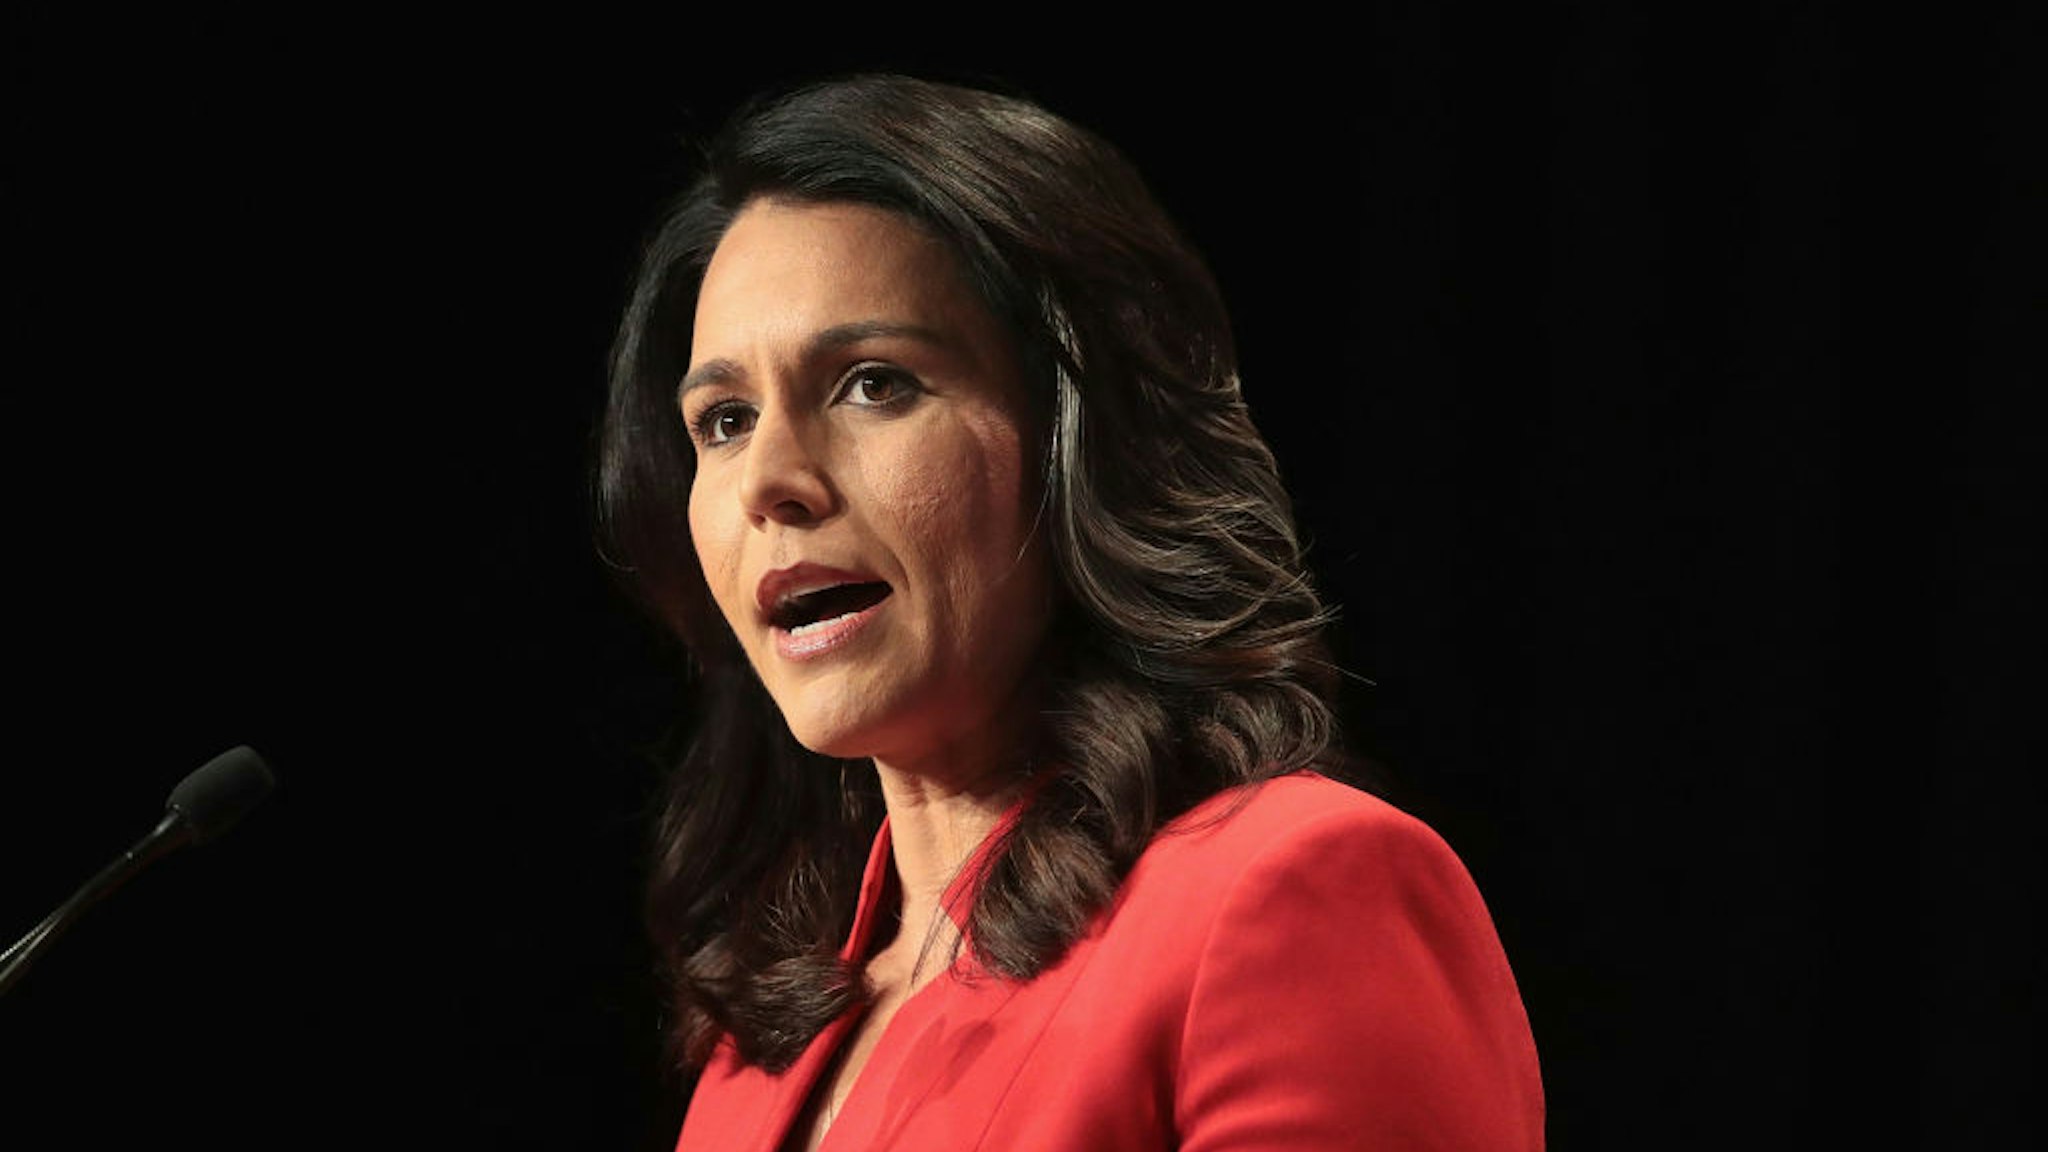 Tulsi Gabbard speaks at the Iowa Democratic Party's Hall of Fame Dinner